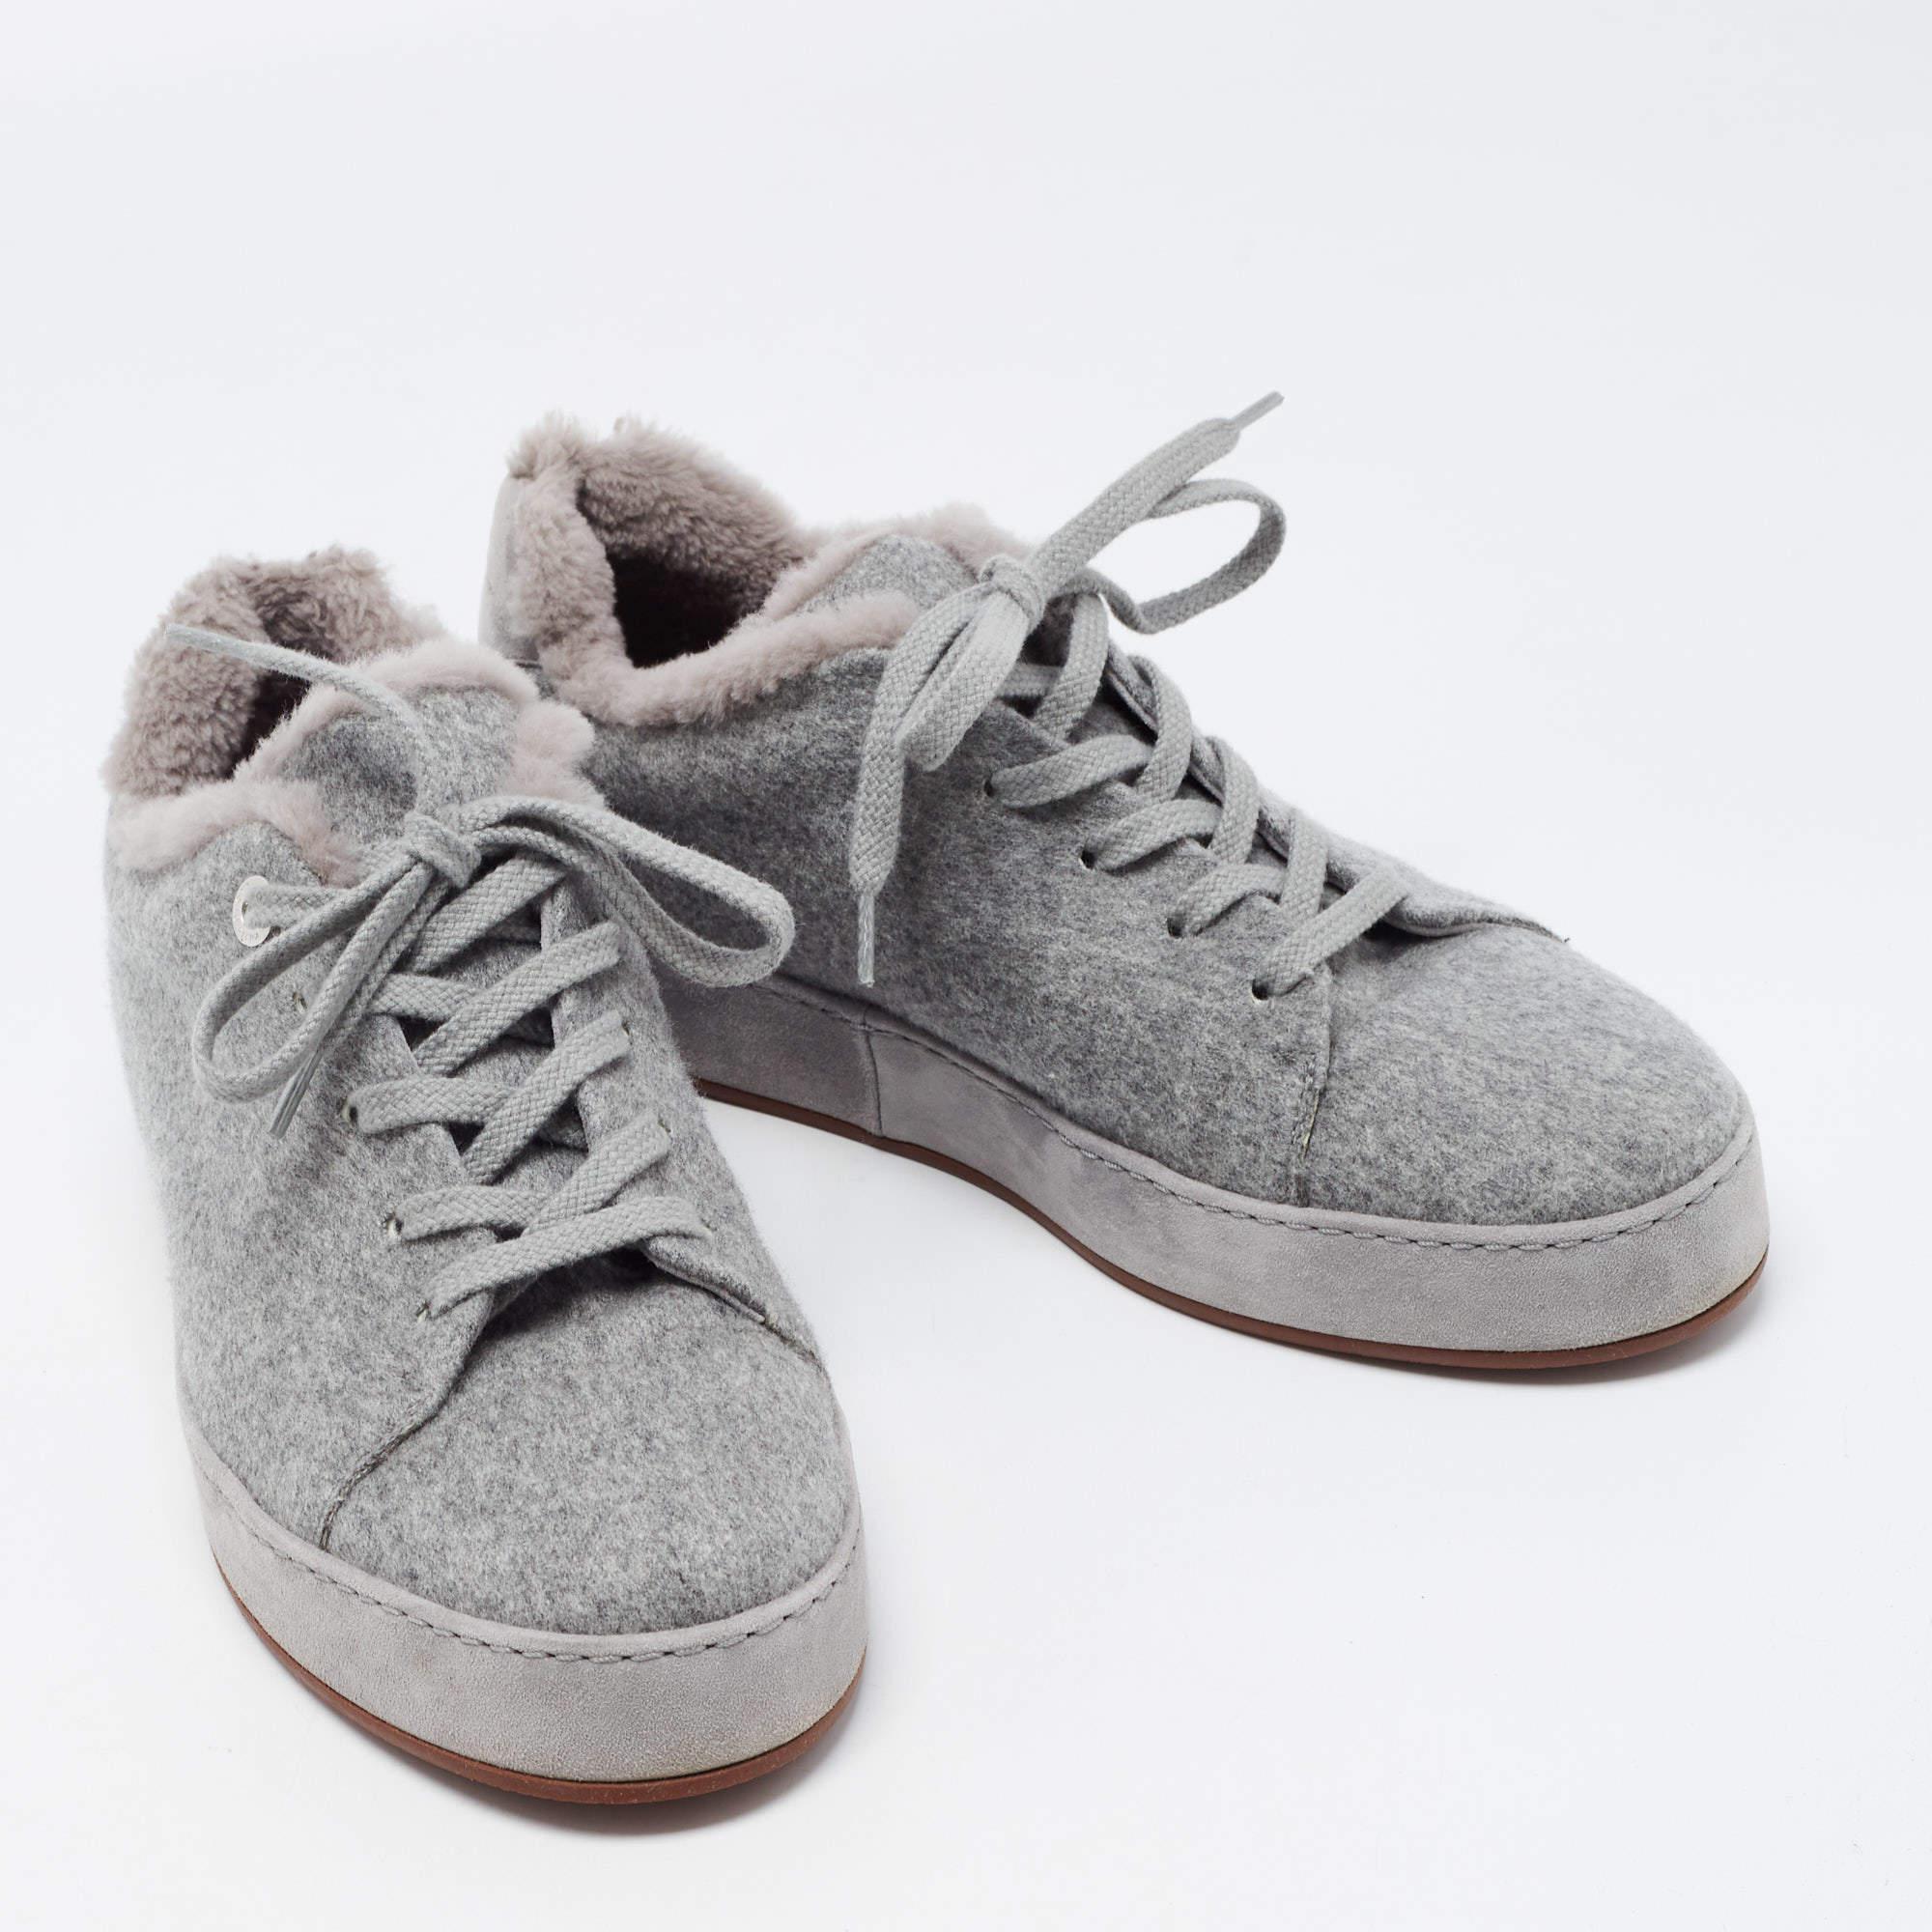 Loro Piana Grey Fabric and Fur Nuages Low Top Sneakers Size 38.5 1